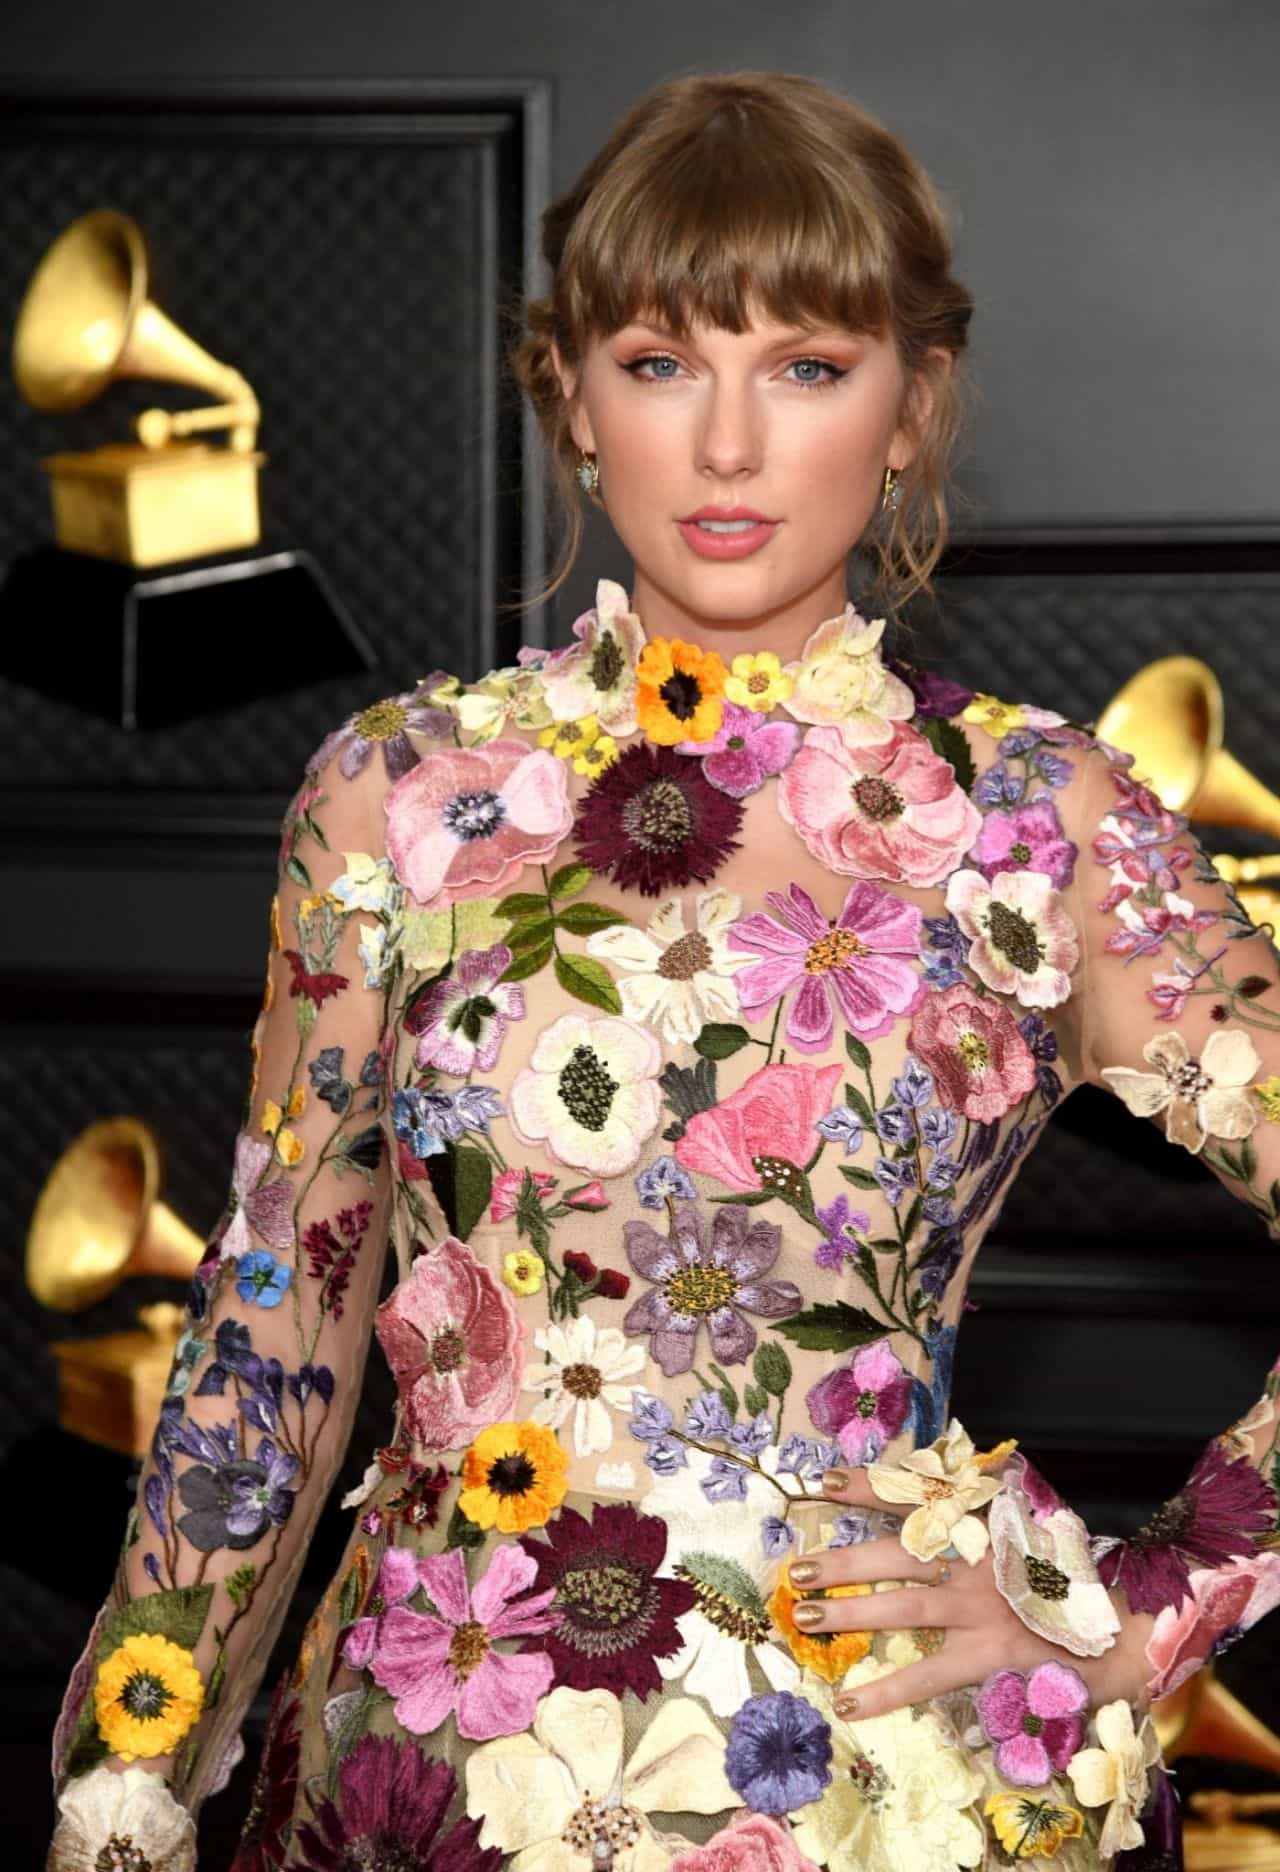 Taylor Swift Shakes an Oscar de la Renta Dress with Flowers at the Grammys